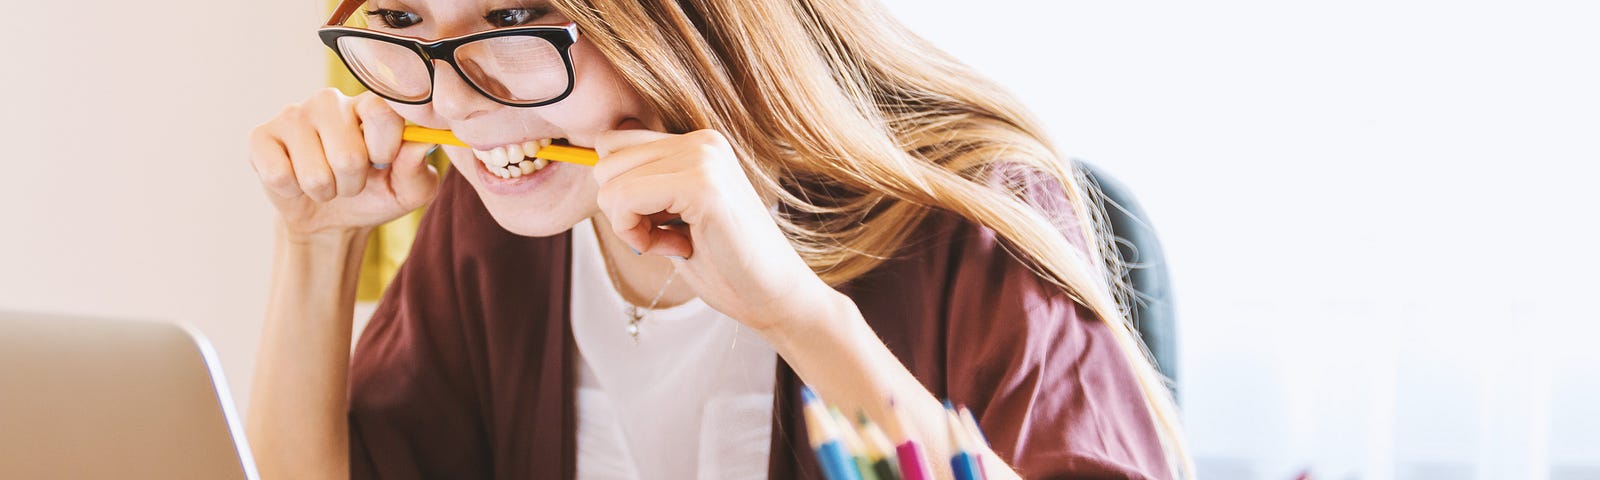 A lady in glasses sits at a desk over a laptop. She looks excited and holds a yellow pencil in her mouth with both hands. On her desk is a pen holder containing an assortment of coloured pencils.